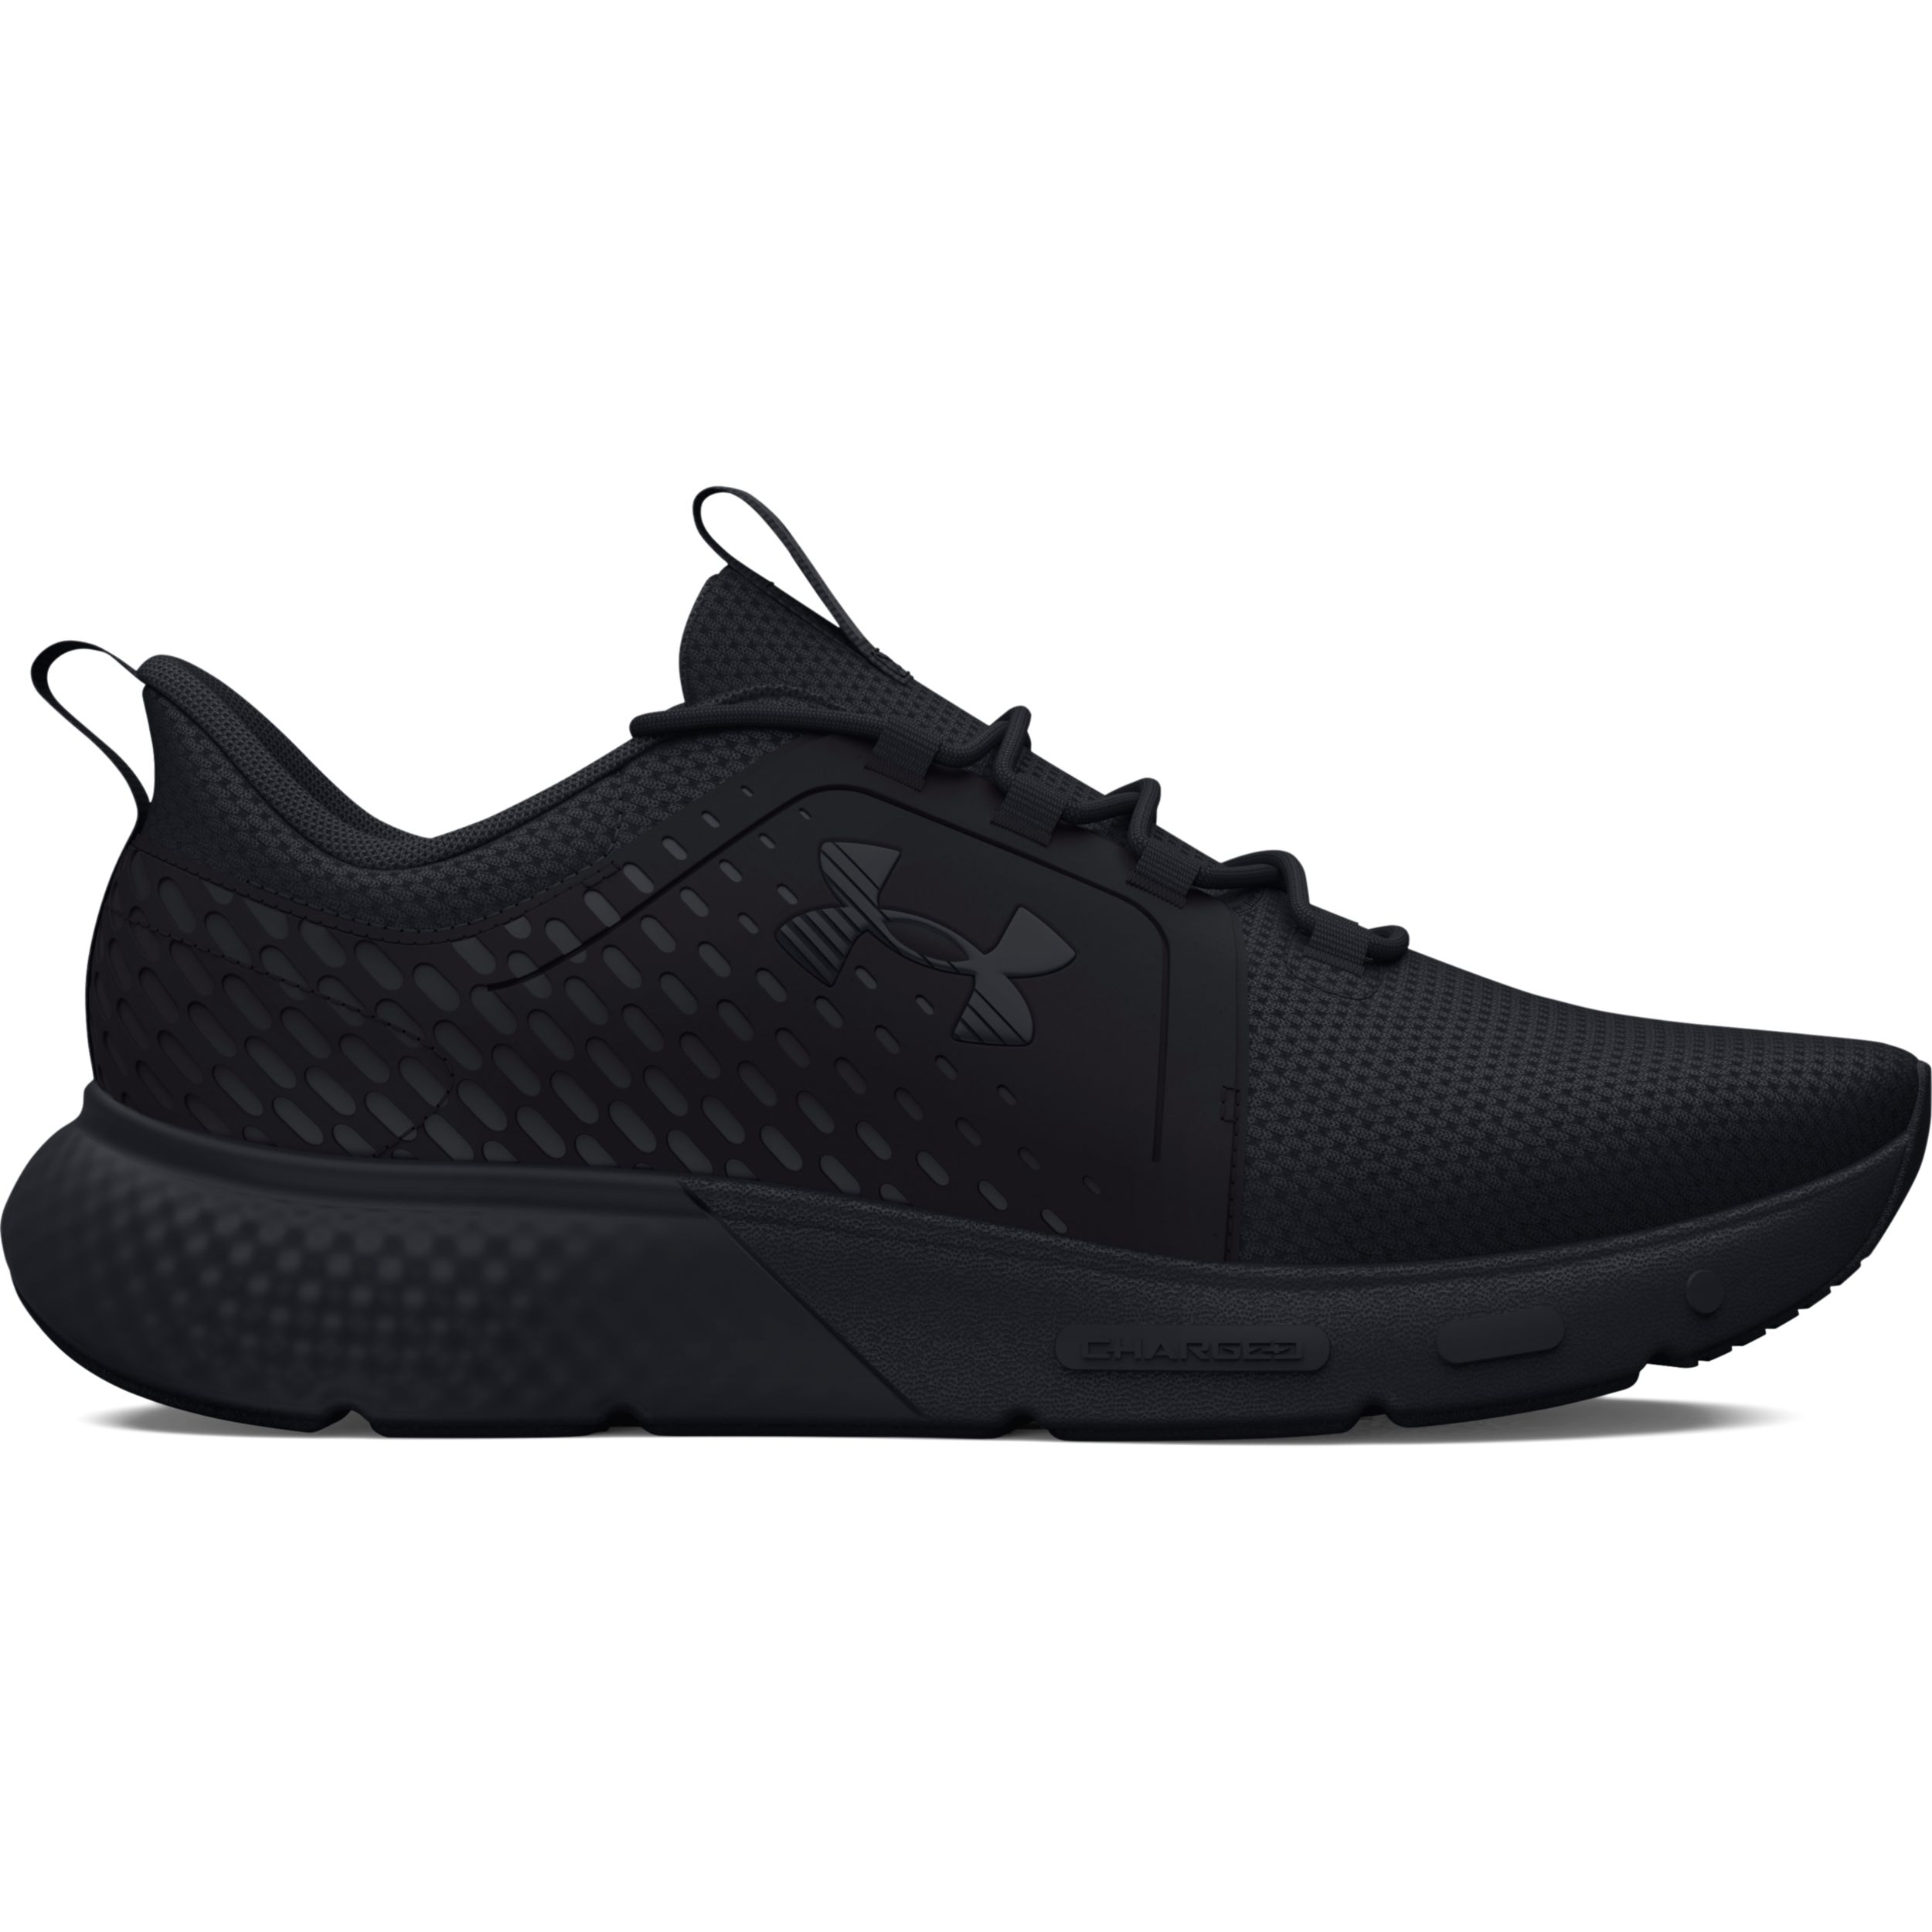 Under Armour Women's Charged Decoy Running Shoes | Sportchek